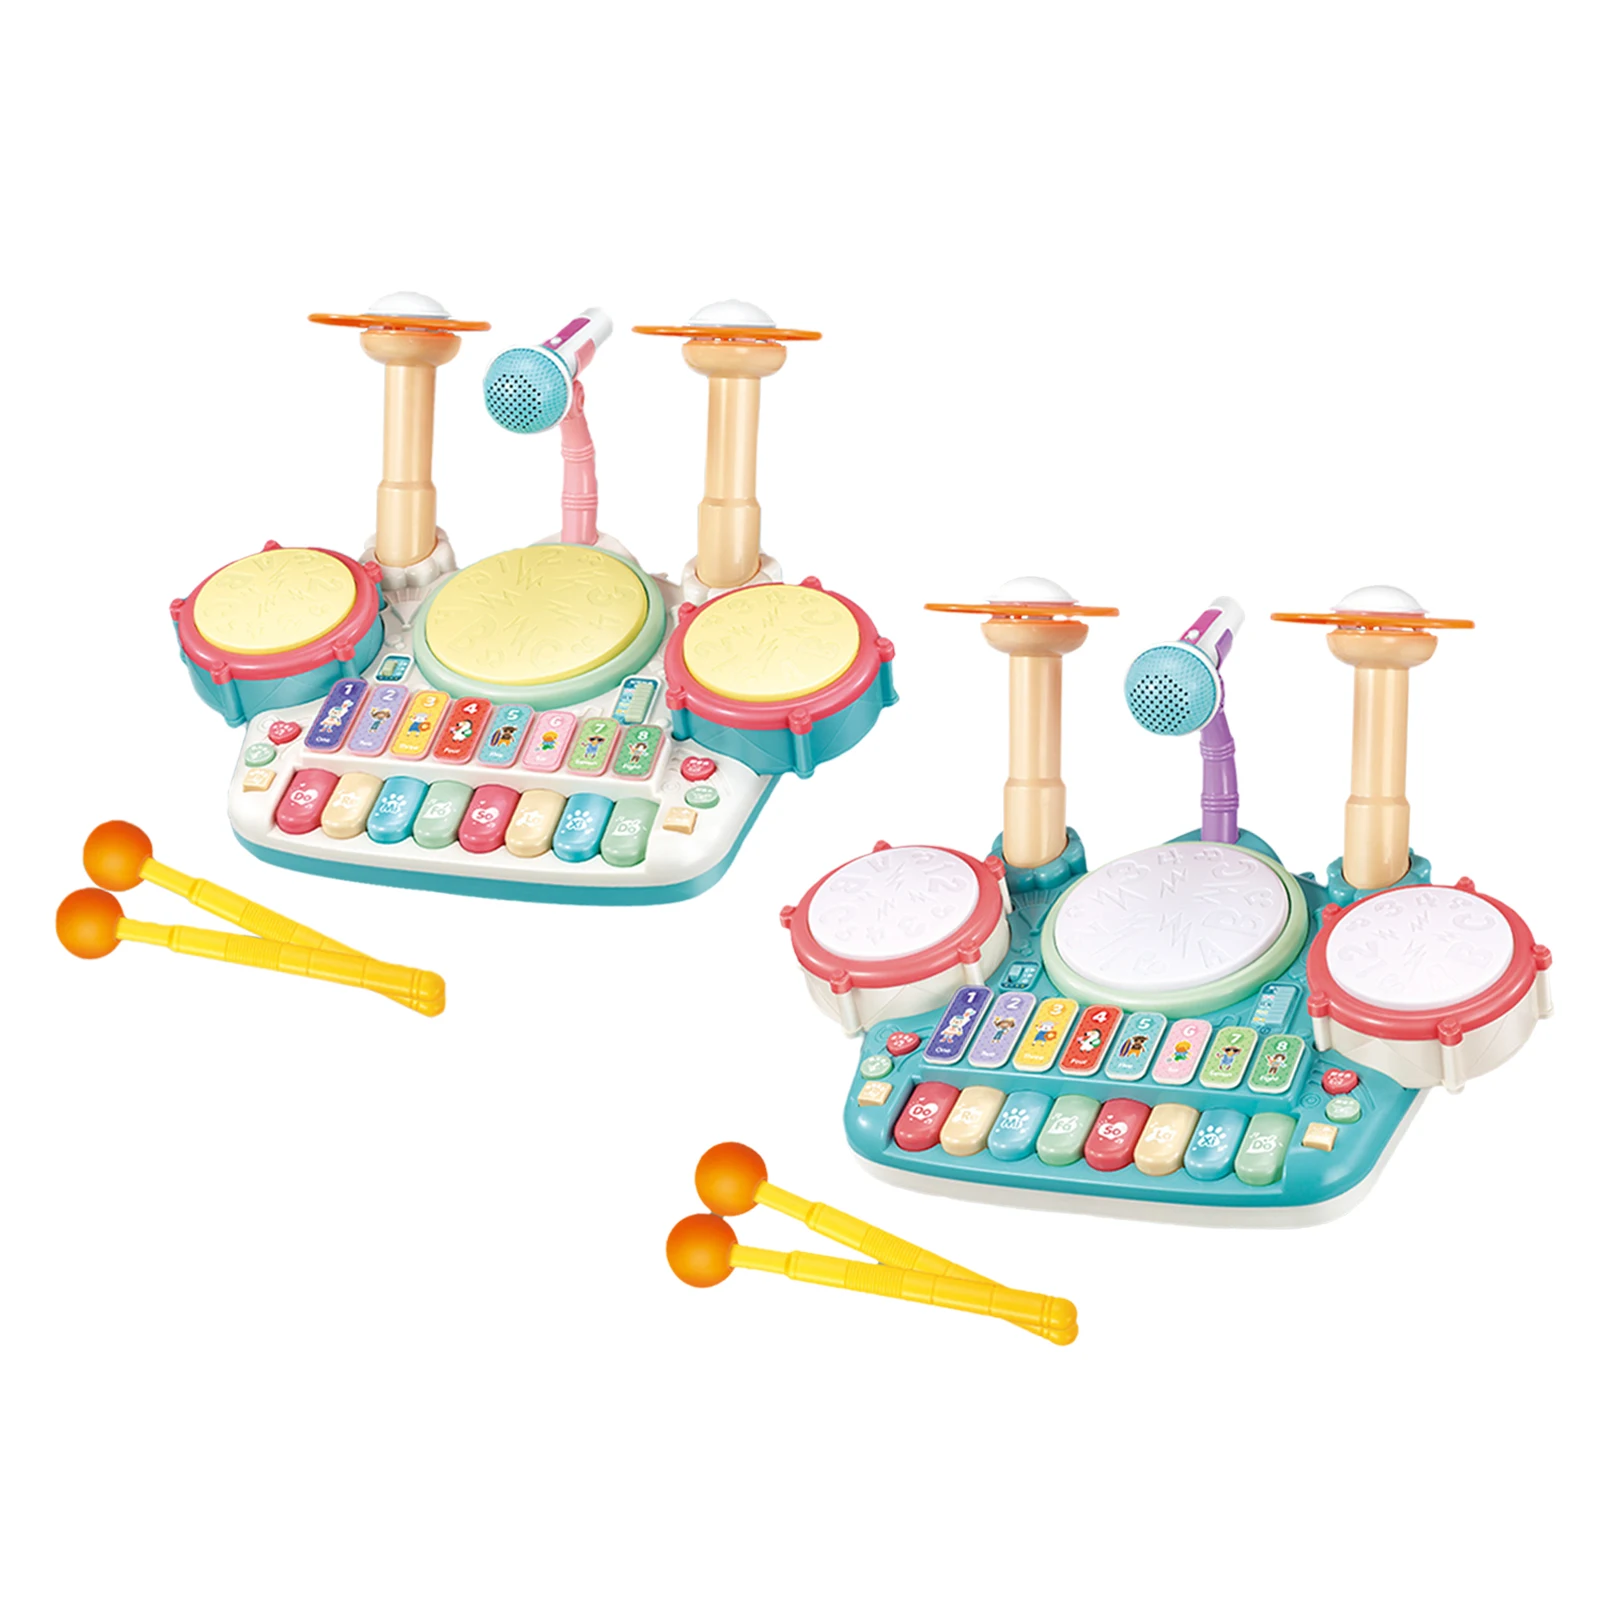 ABS Kids Drum Toy Early Education with Microphone Training Gifts Toys Educational Multi-Function Jazz Drum Musical Toy for Kids